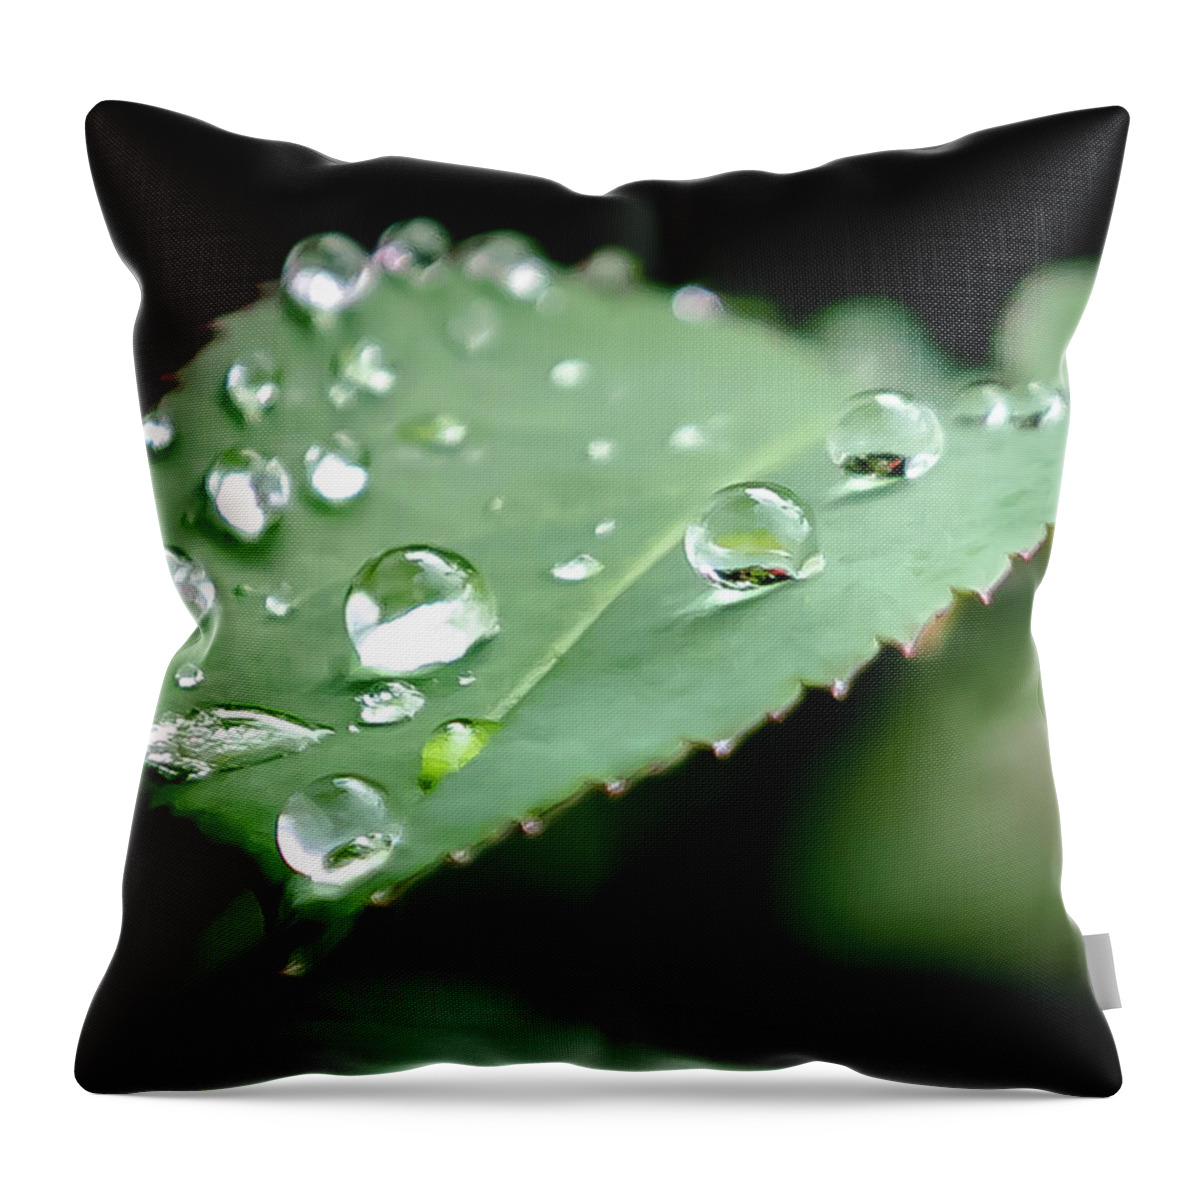 Leaf Throw Pillow featuring the digital art The Leaf and the Raindrops by Ed Stines